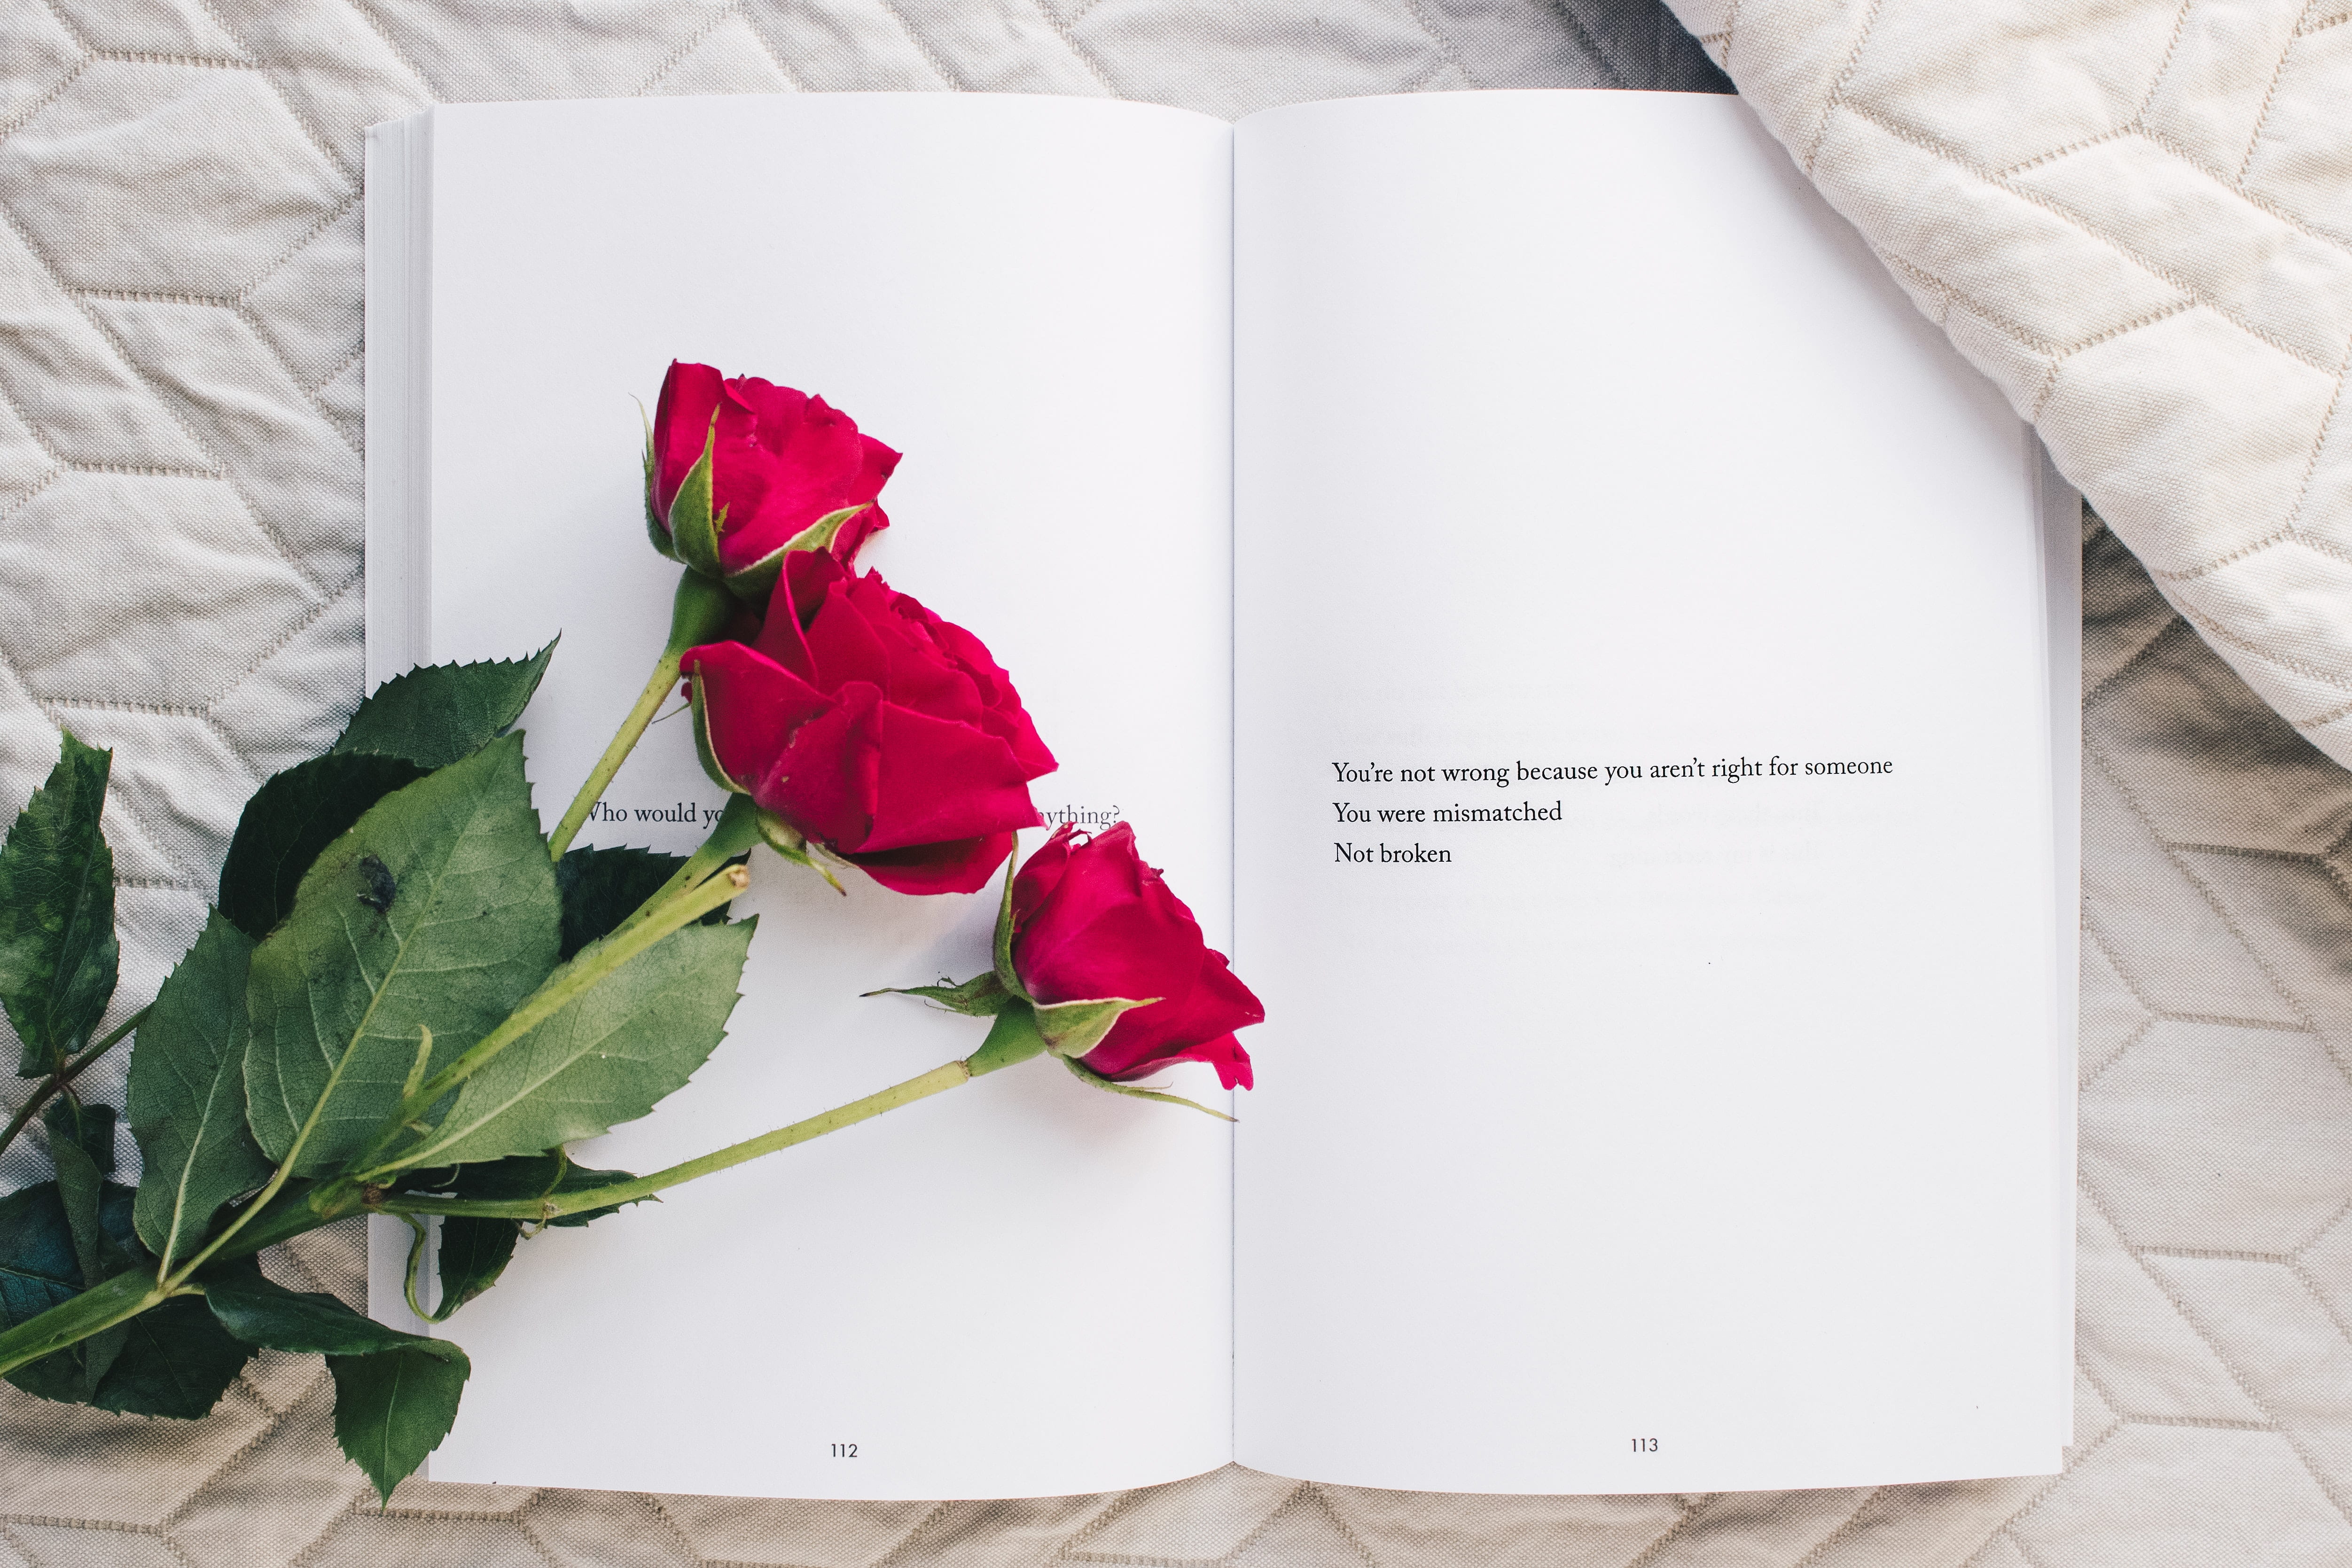 Three roses on a book
